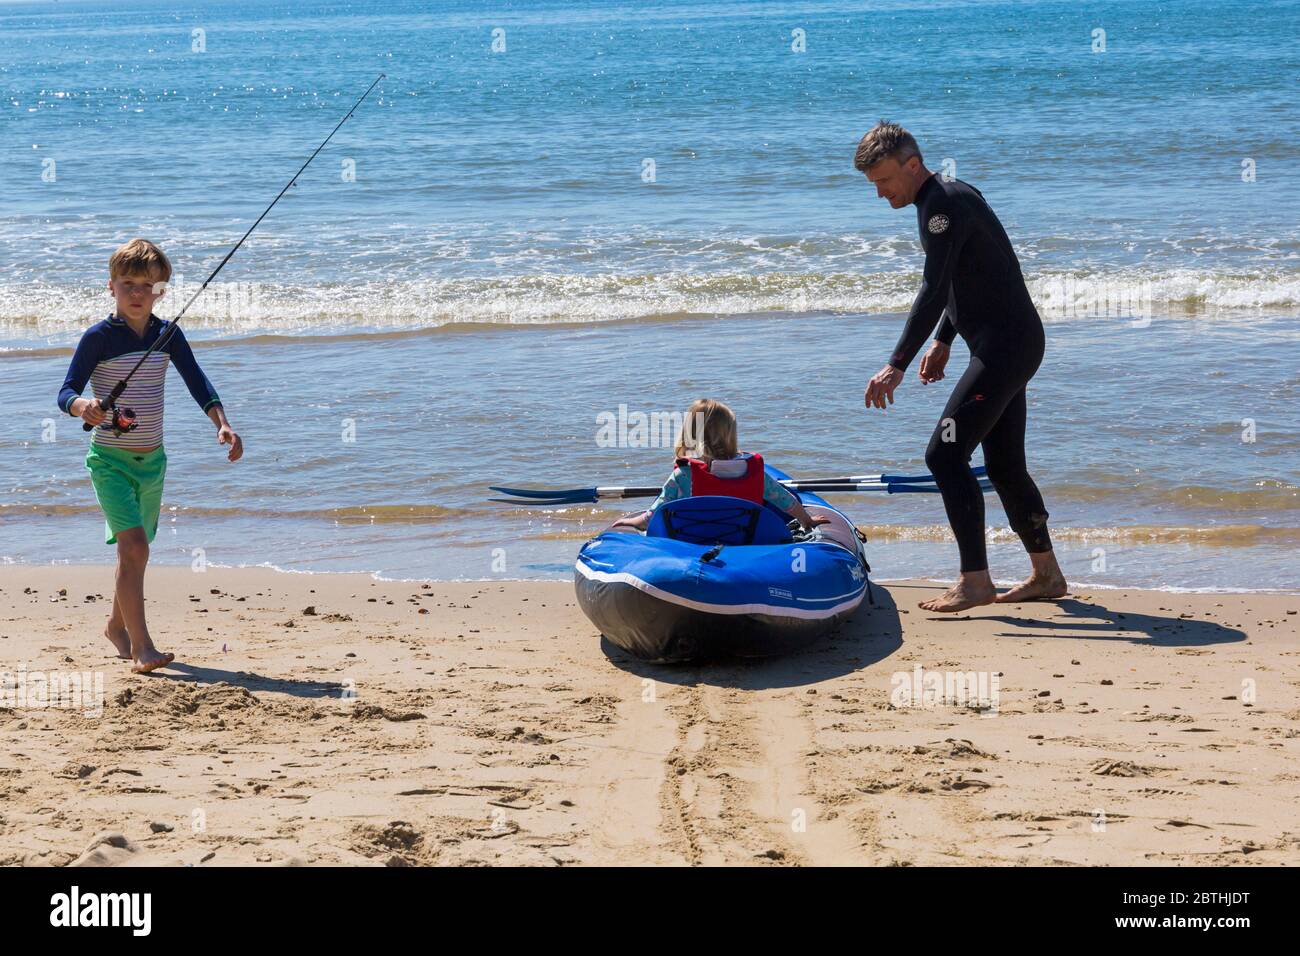 Bournemouth, Dorset UK. 26th May 2020. UK weather: another hot sunny day at Bournemouth beaches with clear blue skies and unbroken sunshine, as the glorious weather continues and temperatures rise. Sunseekers head to the seaside to enjoy the sunshine. Henry and Olivia, 6 and 5, go kayak fishing in the sea. Credit: Carolyn Jenkins/Alamy Live News Stock Photo